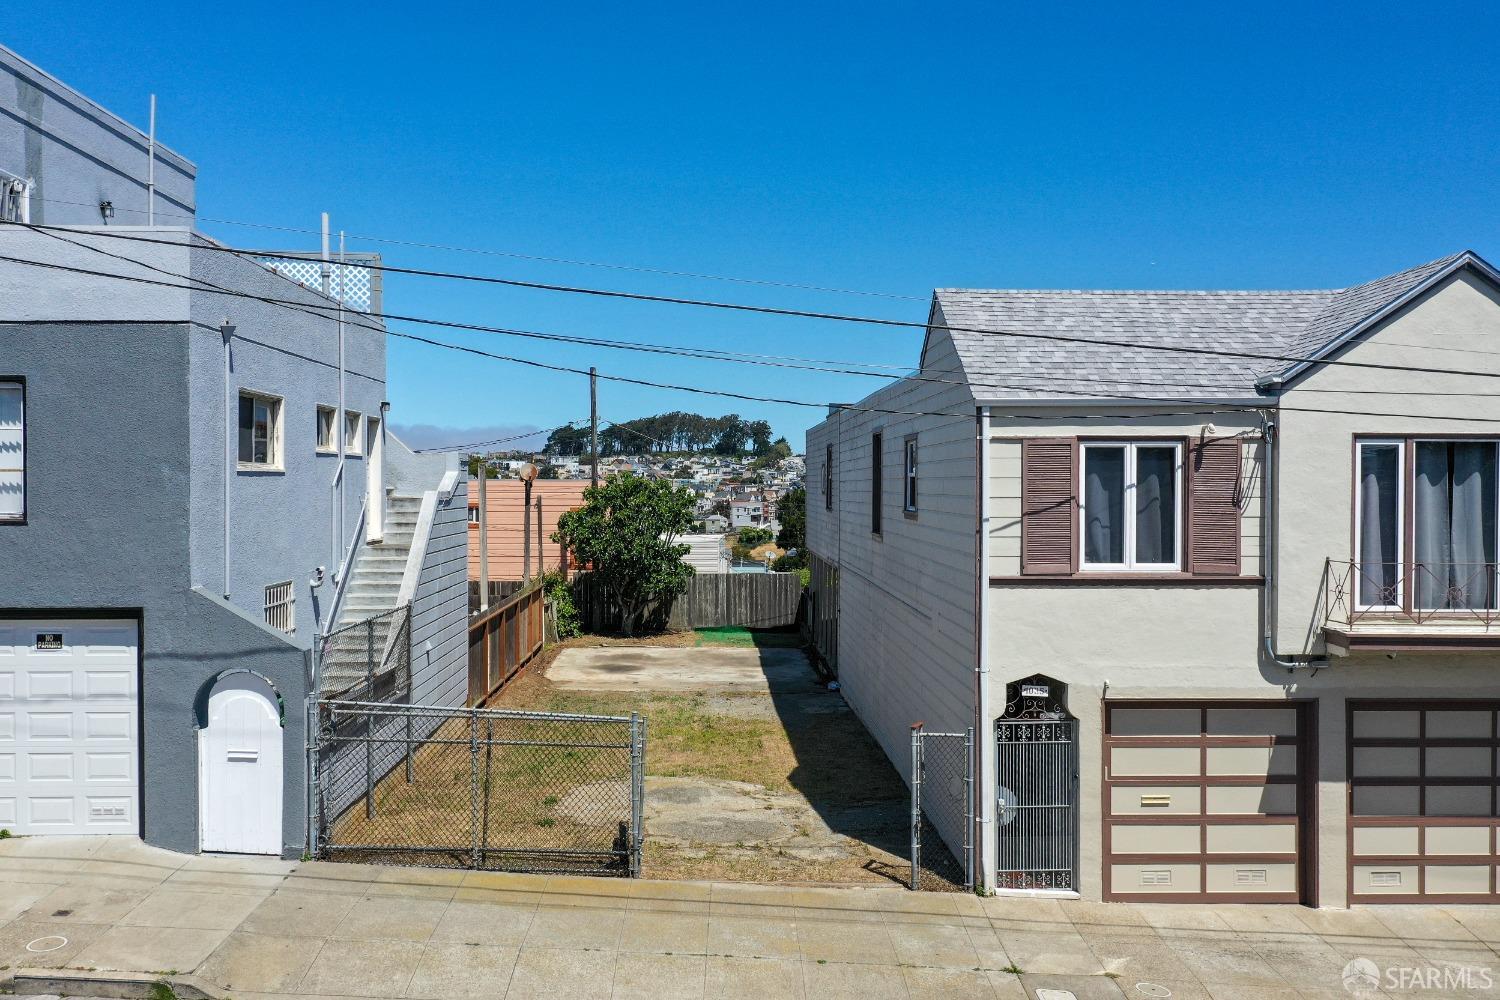 Photo of 1029 Silver Ave in San Francisco, CA